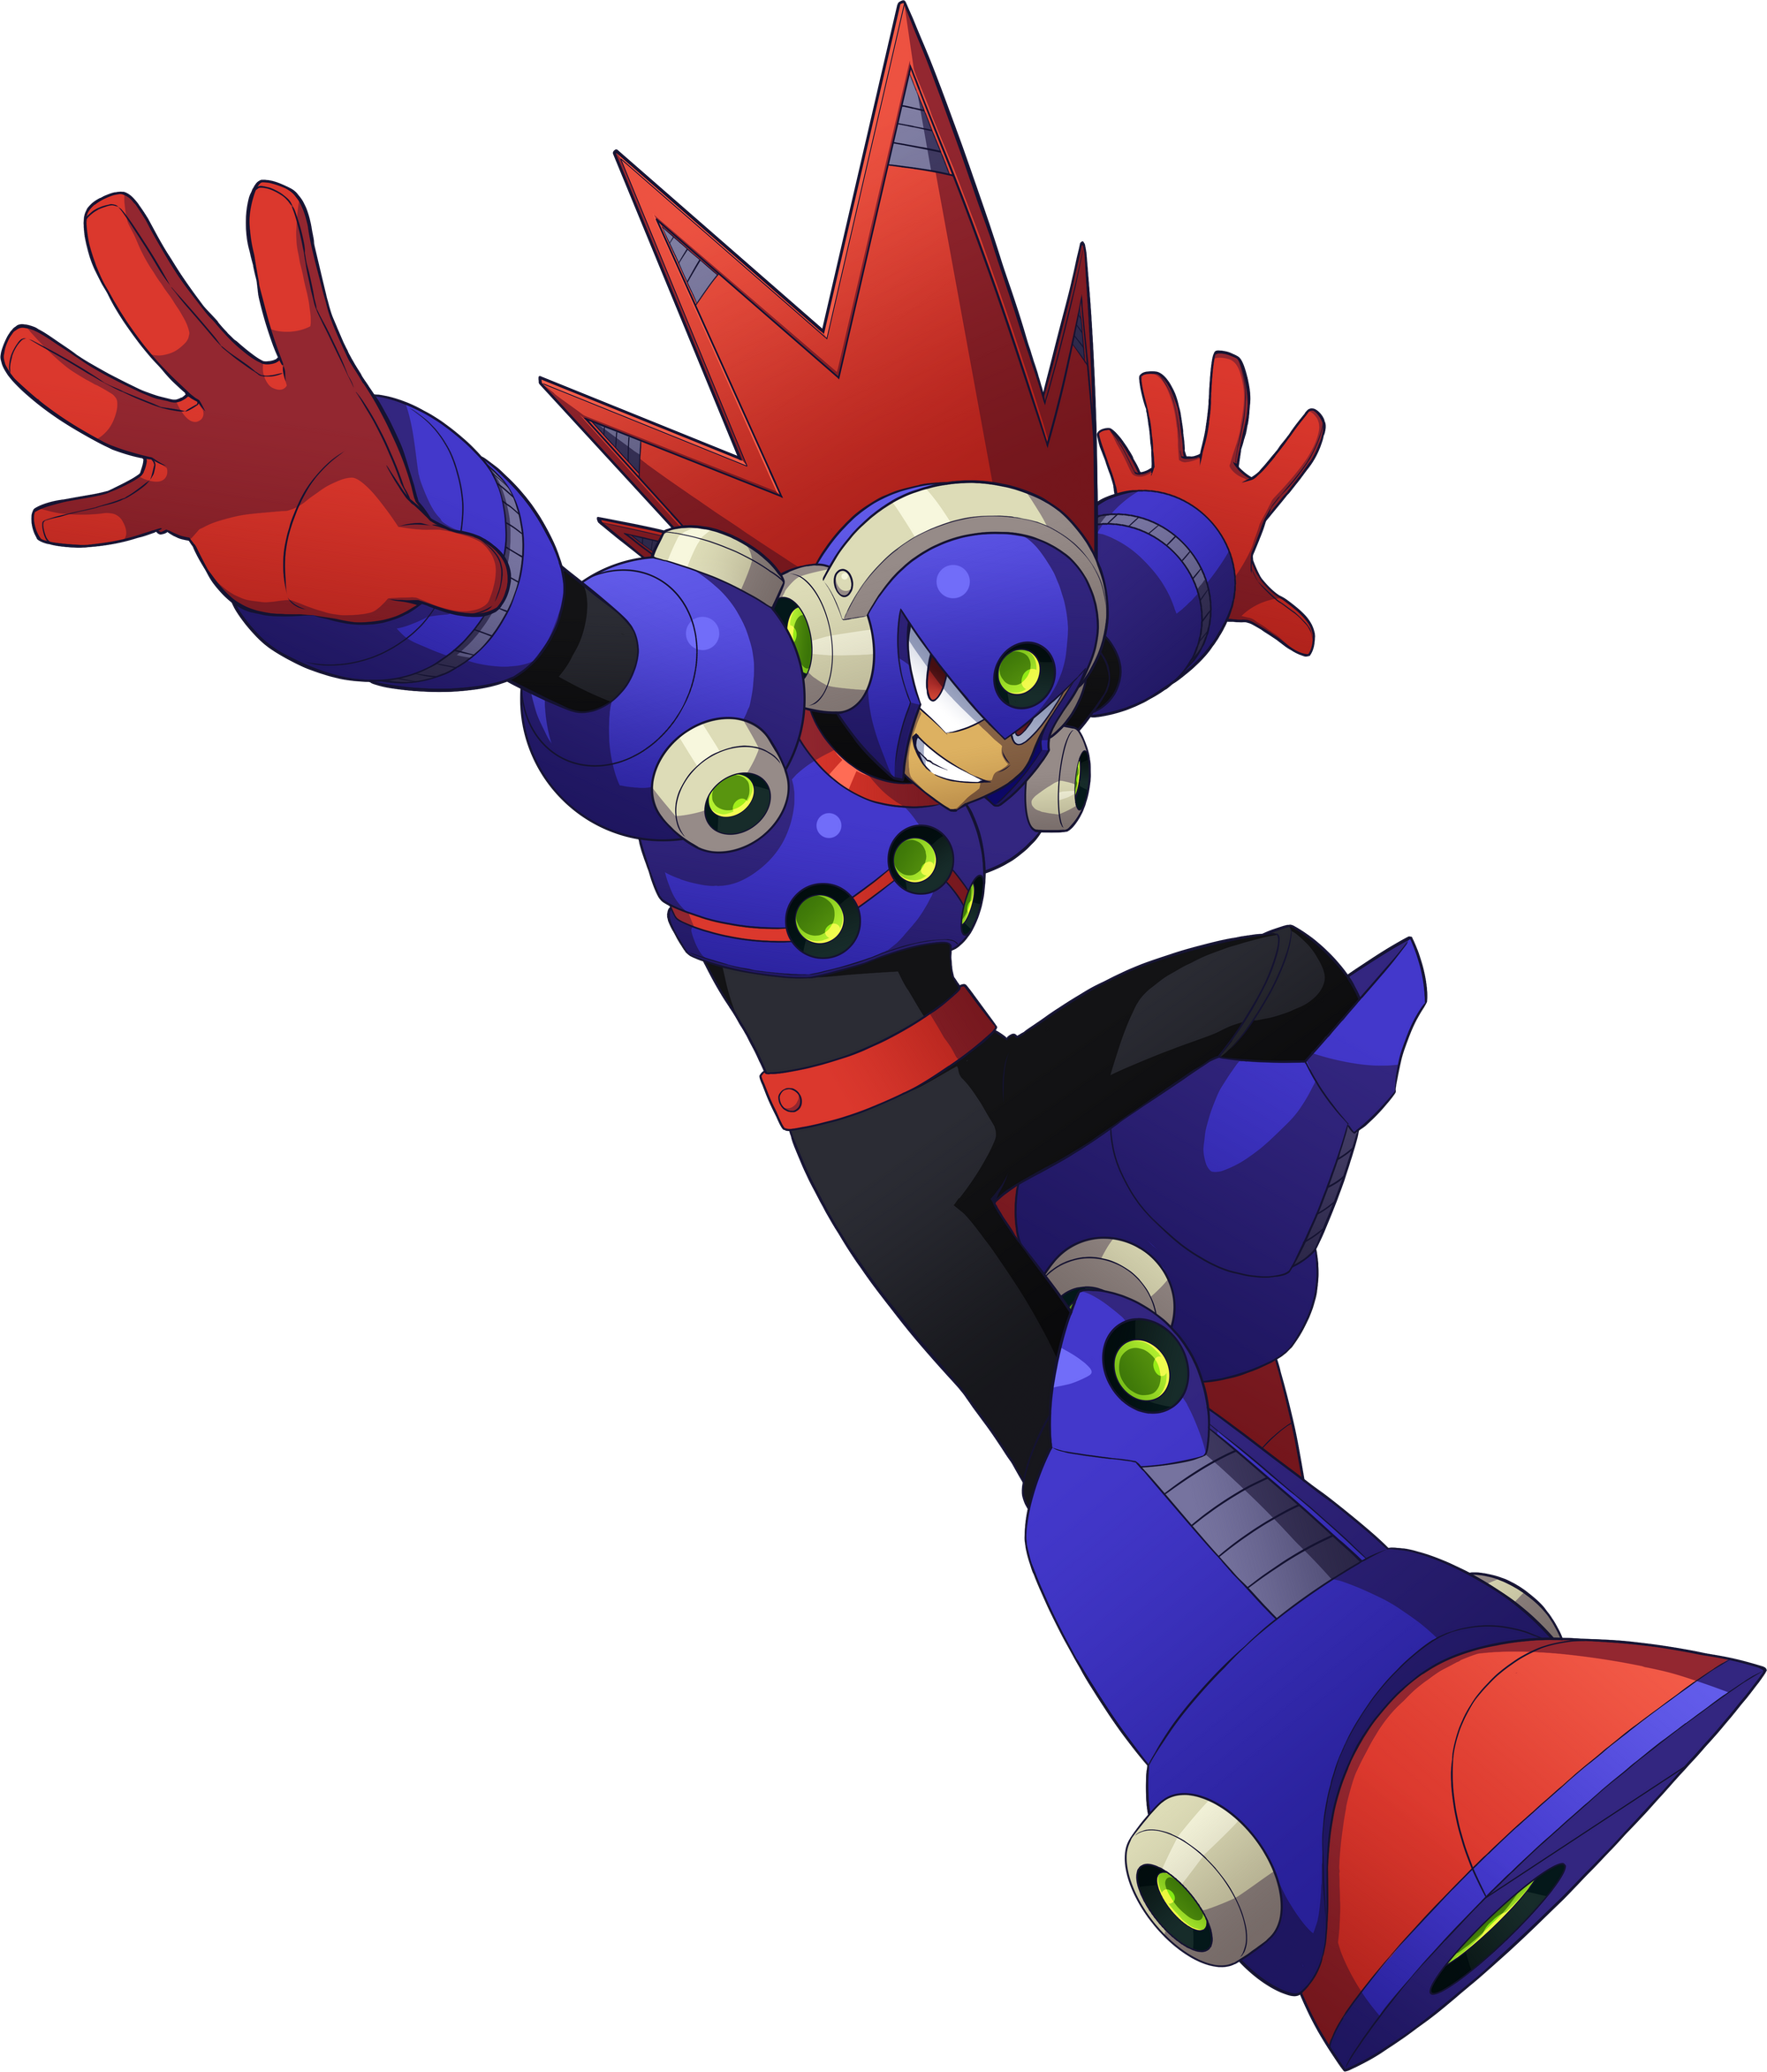 https://vignette.wikia.nocookie.net/megaman/images/f/f0/MM11_BlastMan.png/revision/latest/scale-to-width-down/2000?cb=20180703154204